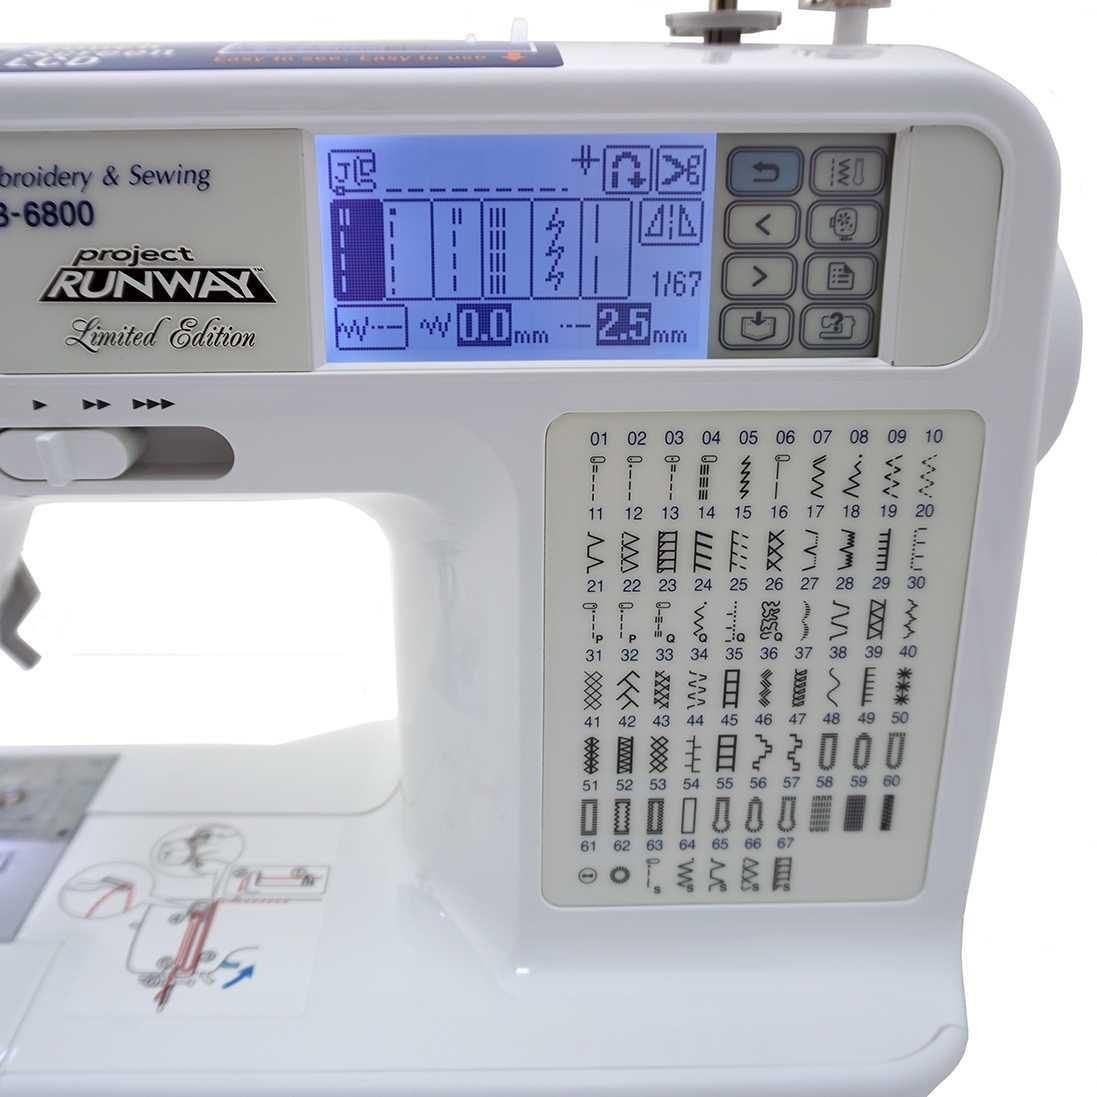 Brother LB-6800PRW Project Runway Limited Edition Sewing & Embroidery  Machine Overview 